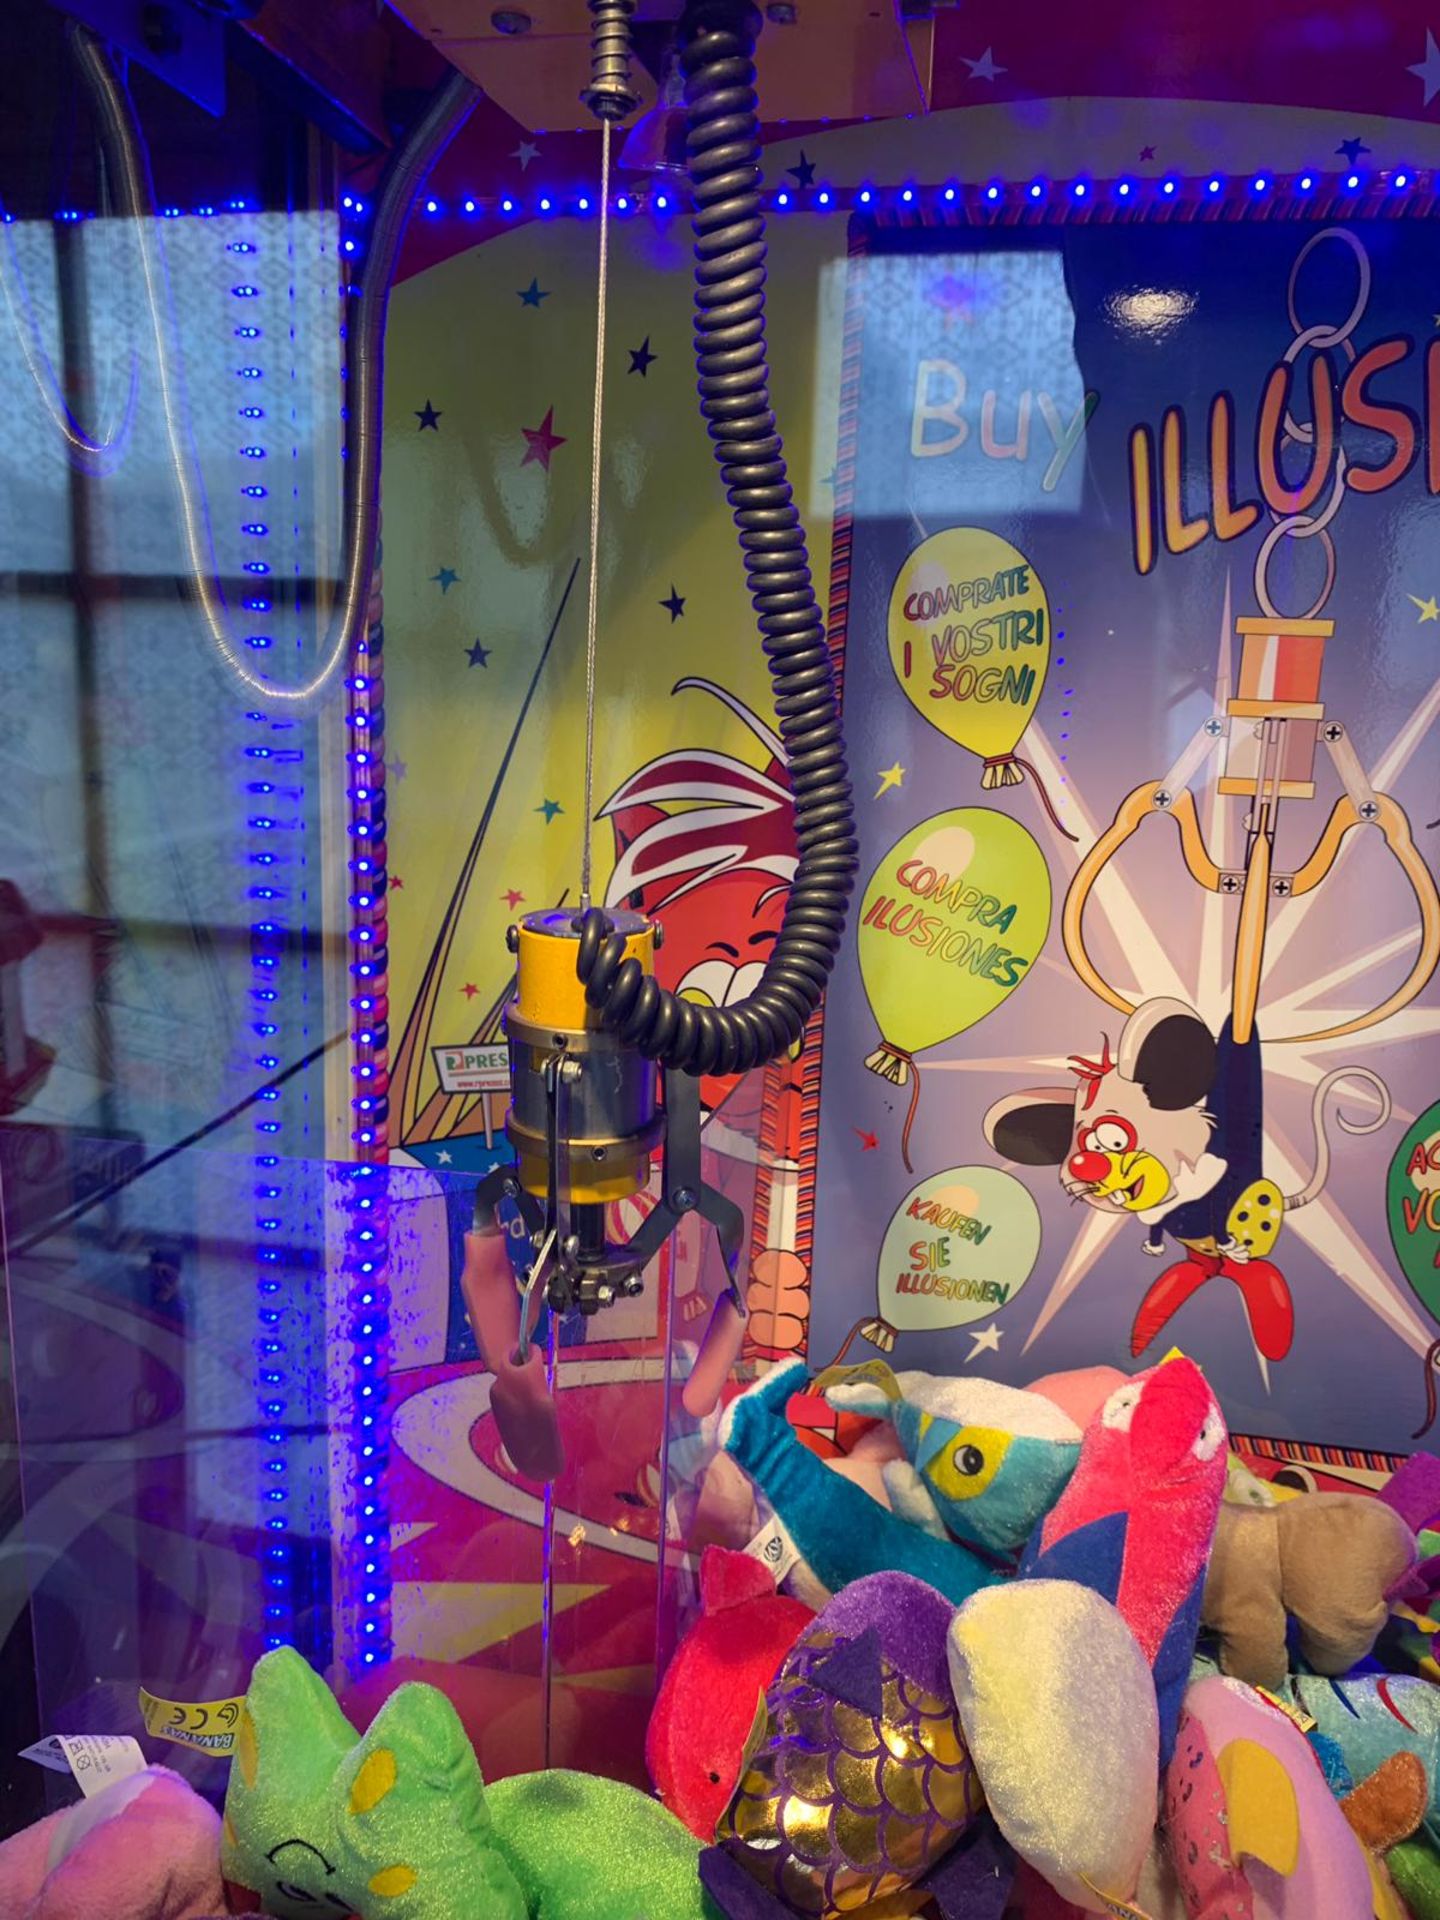 Buy Illusion Arcade Claw Machine, In Working Order *Plus Vat* - Image 6 of 6